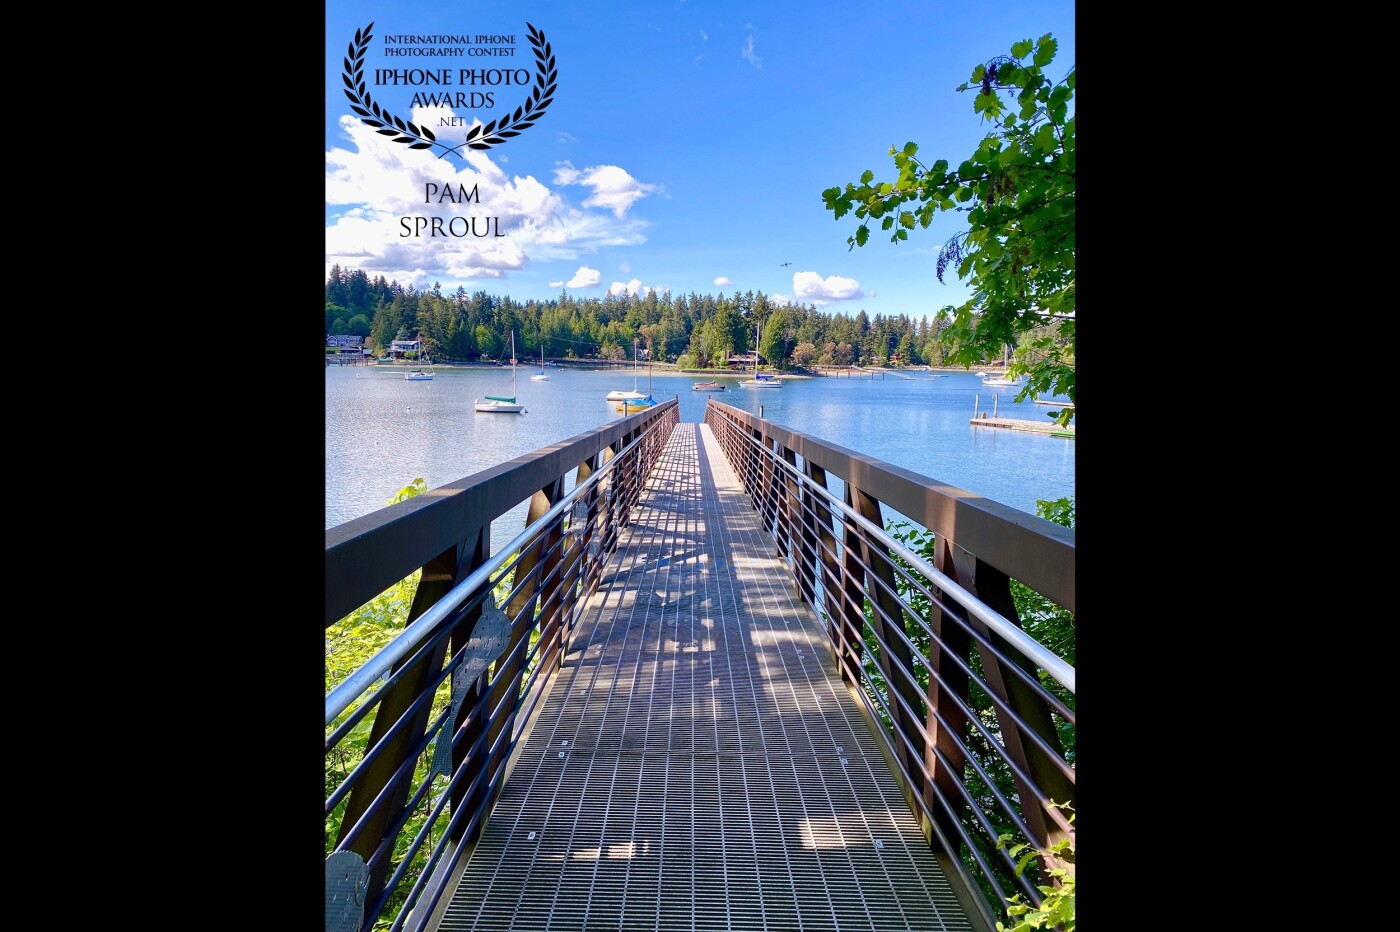 Some images invoke a feeling of peace that is very powerful. I felt this when I walked onto this dock on a beautiful spring day in the Pacific Northwest. Peace and healing capture for our world are important. <br />
“Dock peace” 2020